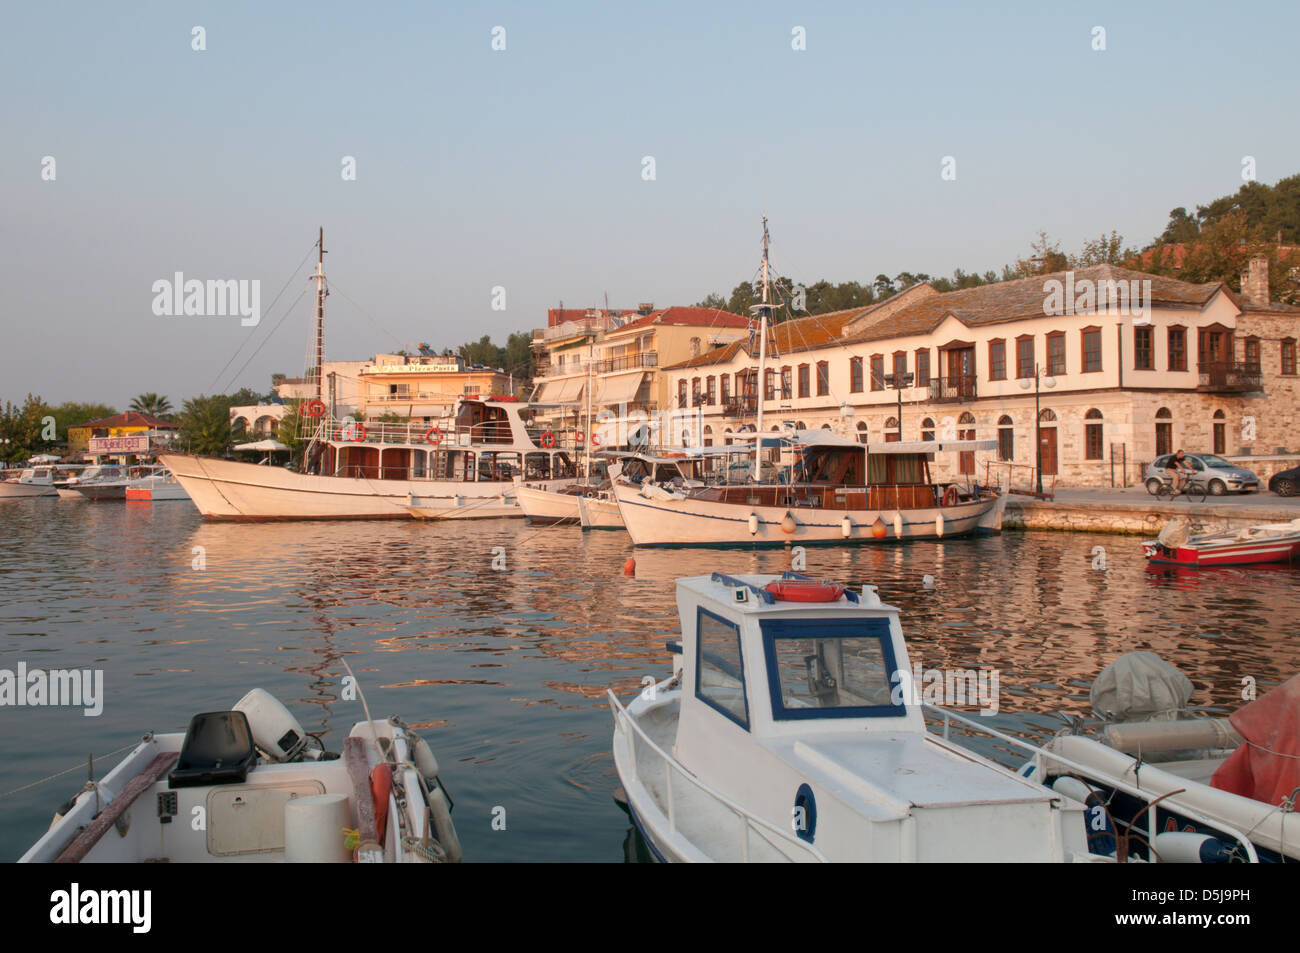 Greek island September The old harbour at Limenas Thassos Town Boats moored Waterfront houses Sunset Stock Photo